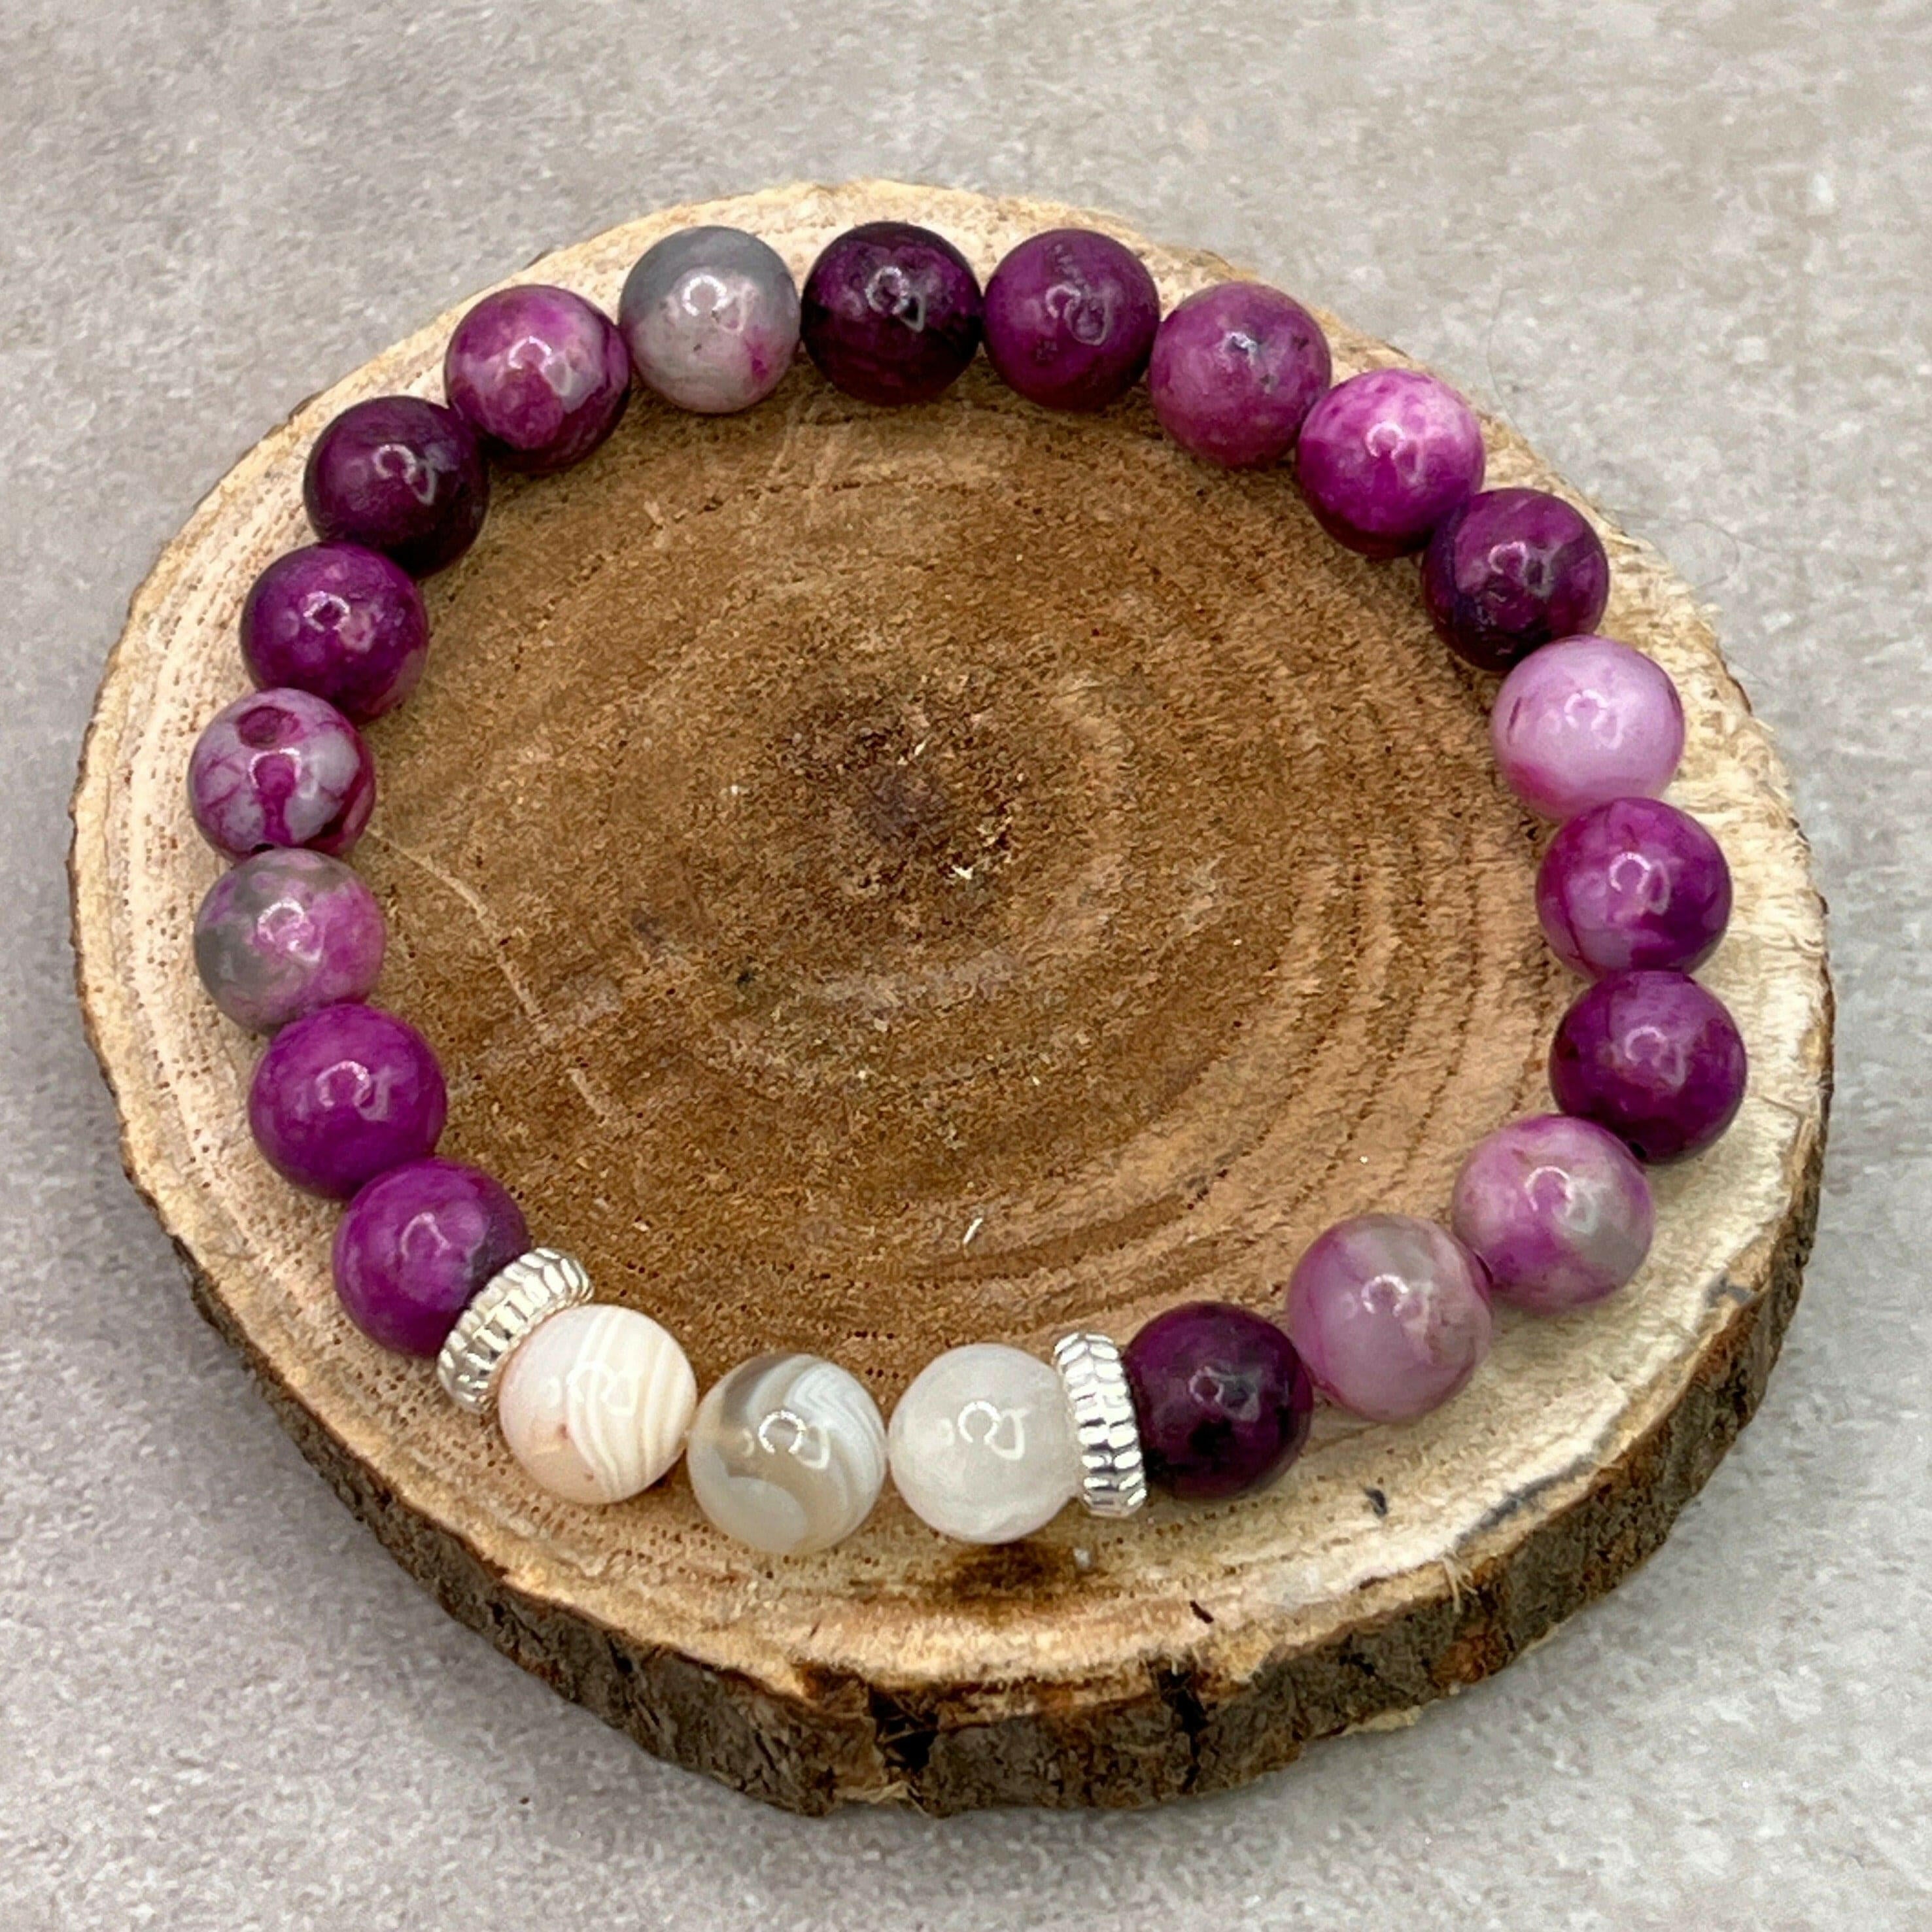 Bec Sue Jewelry Shop chakra bracelet 6.5 / purple / suiliter agate Luxurious One-of-a-Kind Sugilite and Agate 8mm Bead Bracelet - Unisex Sugilite Jewelry Tags 601